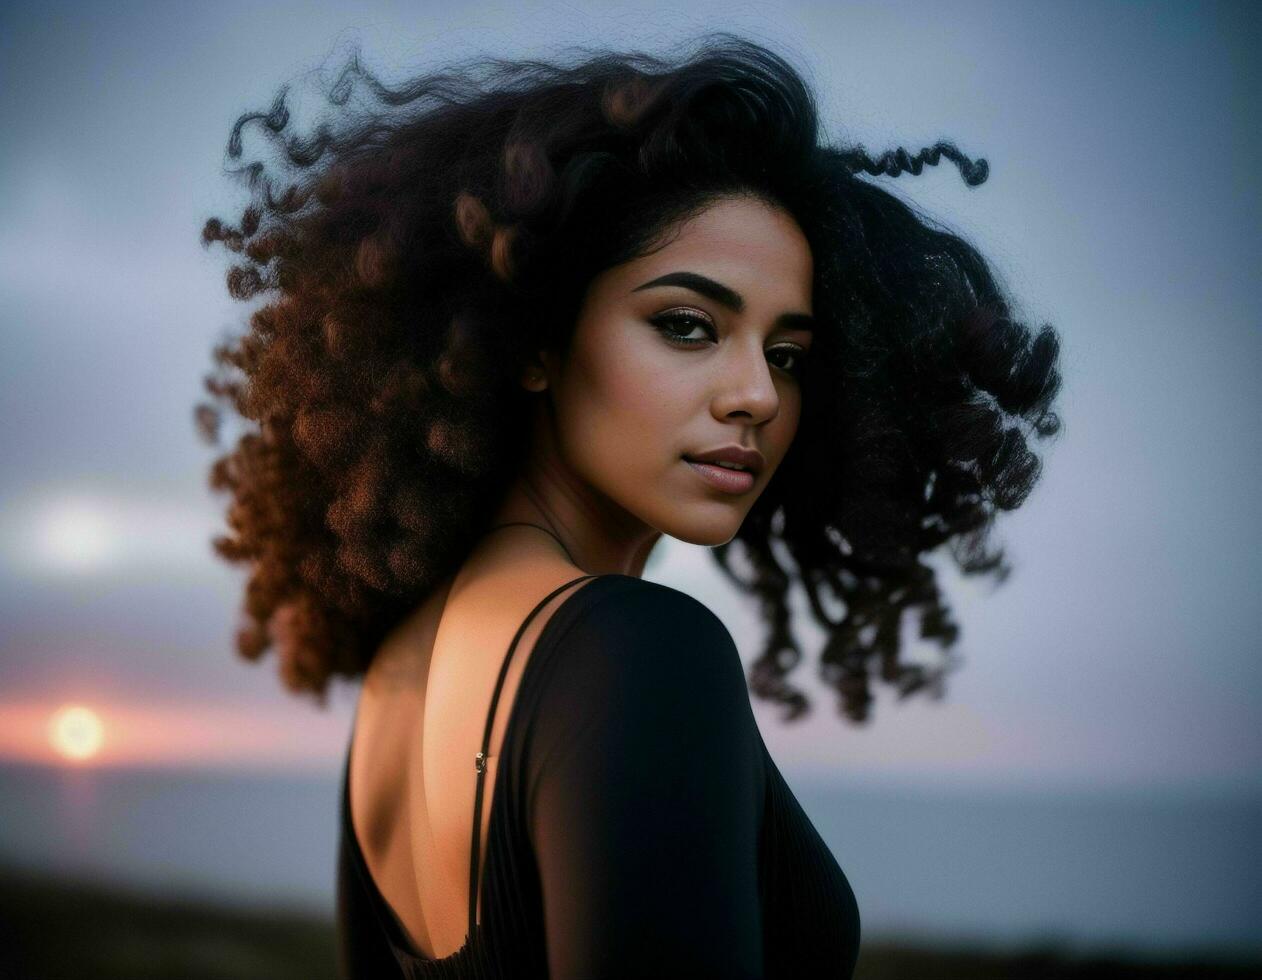 A beautiful brunette with curly hair wearing a light black top outdoors with the sun setting in the background, AI generated photo